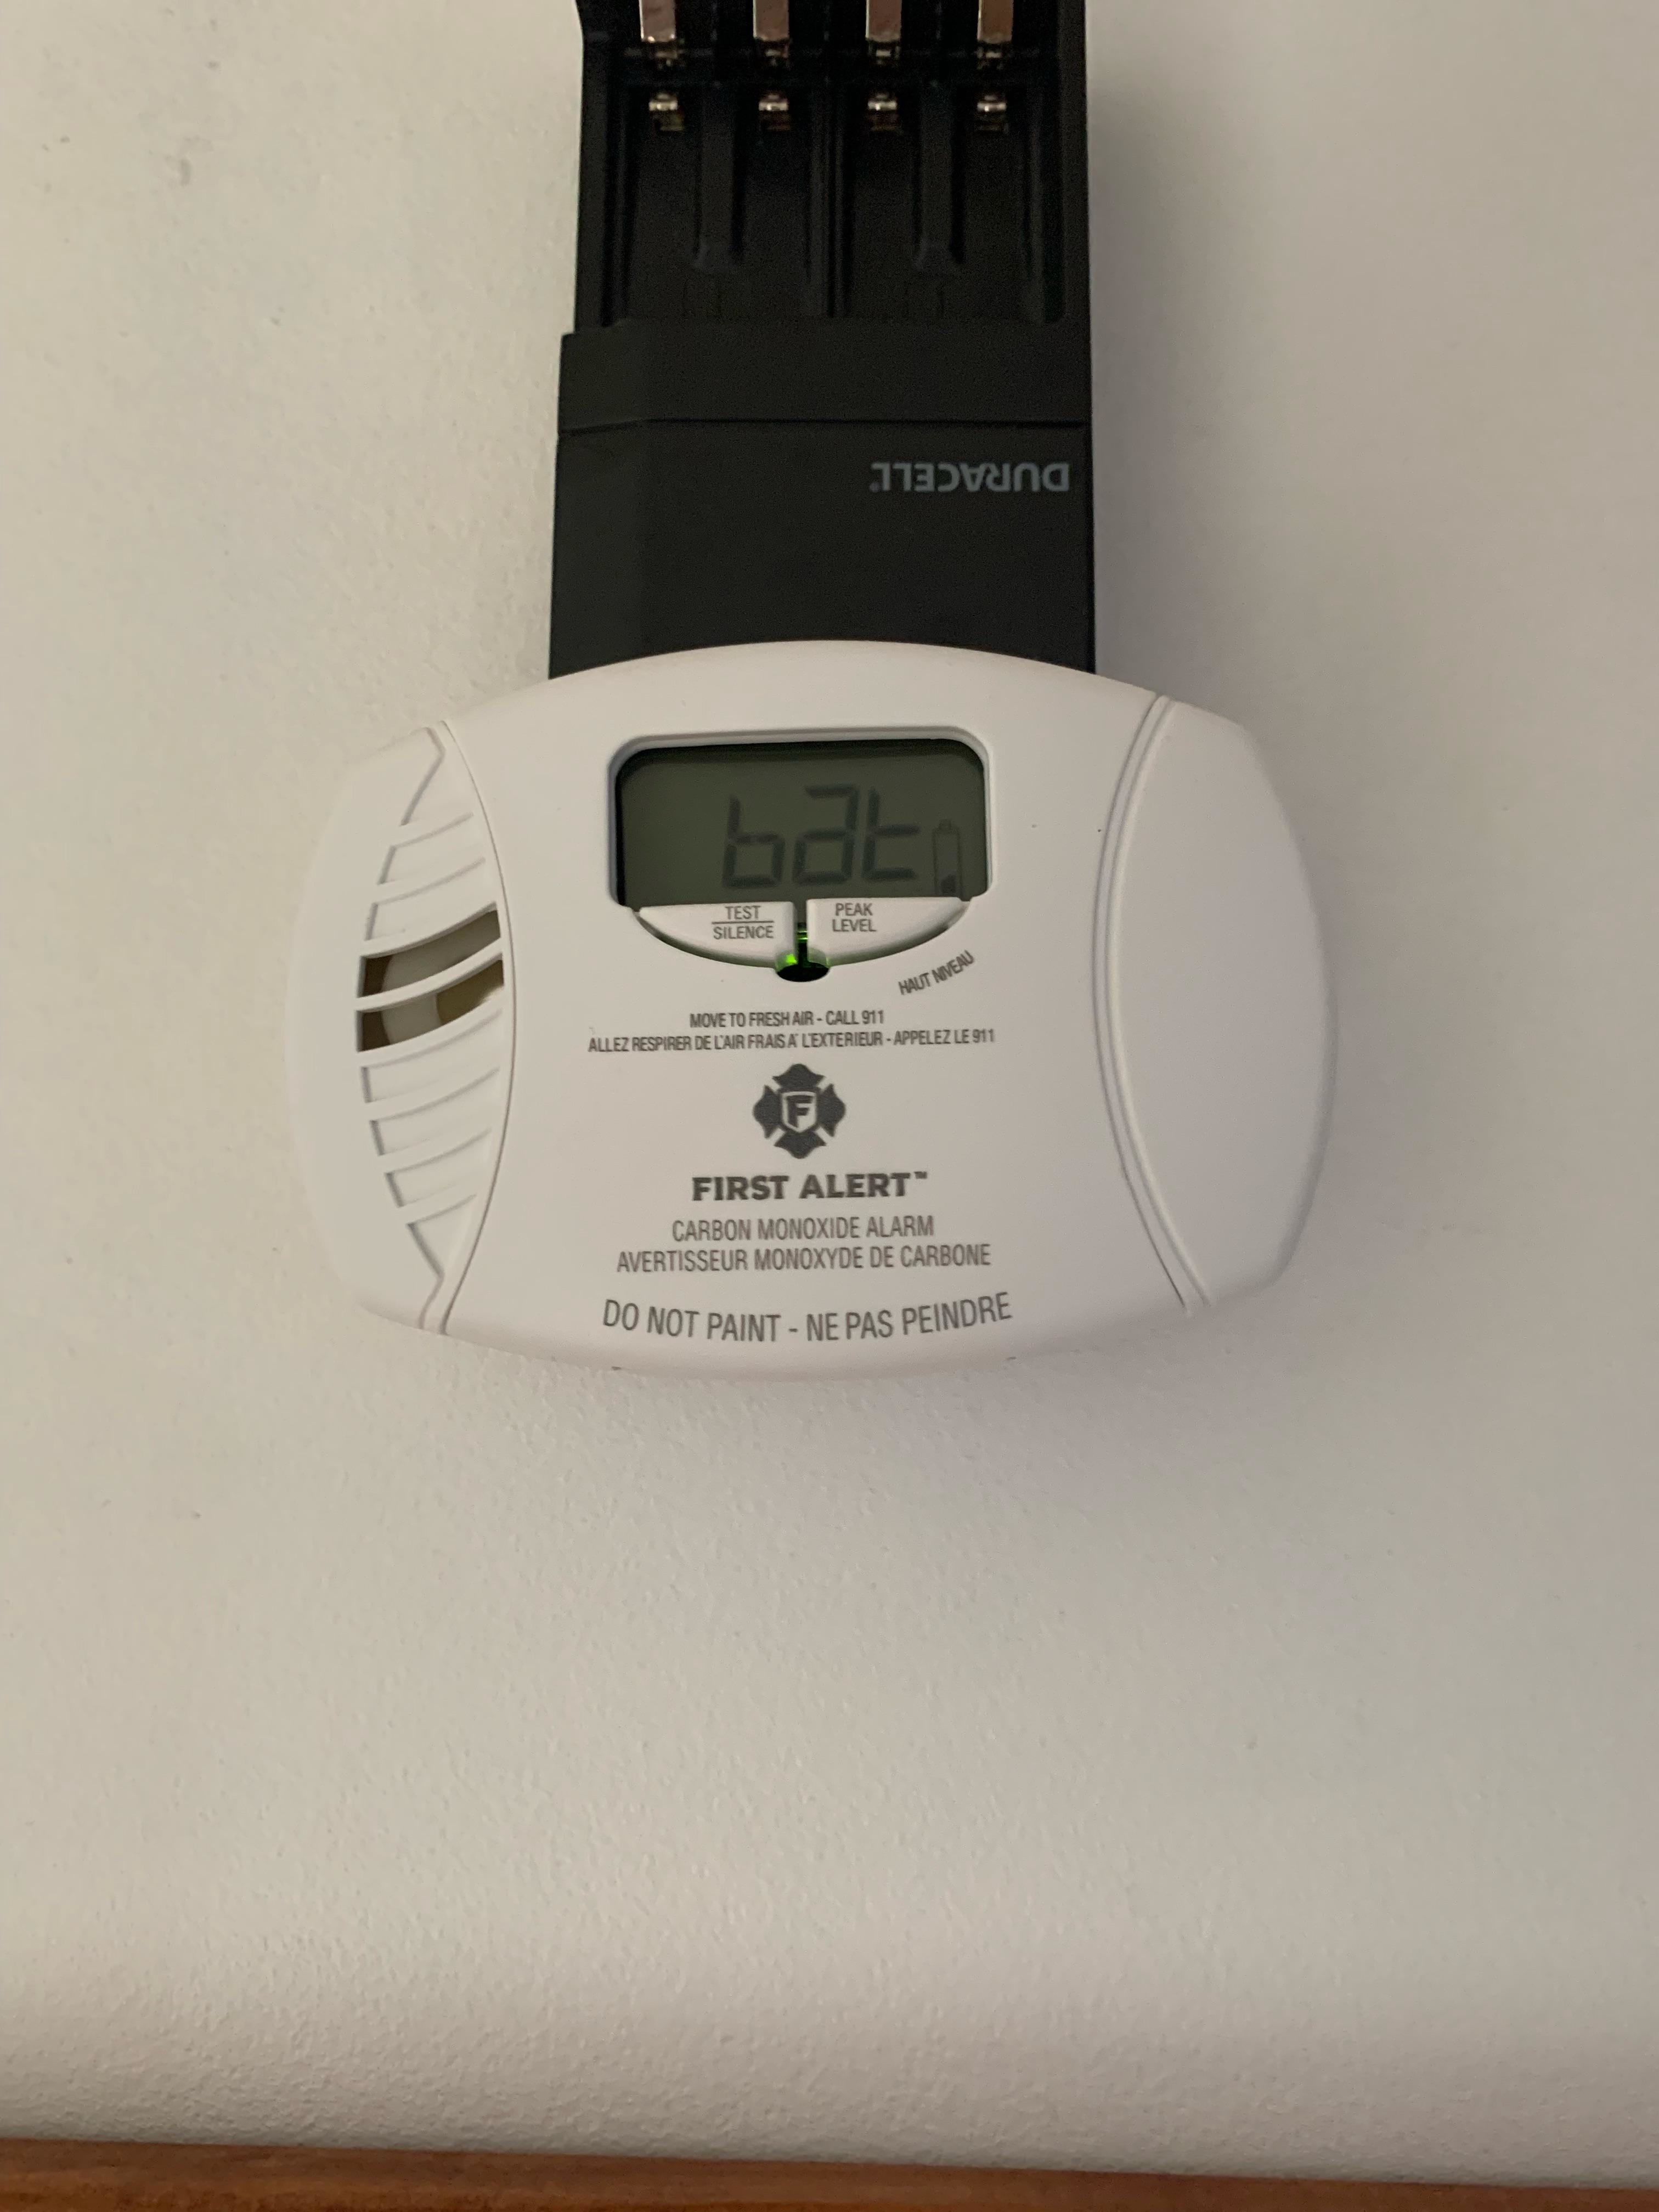 A plugged-in carbon monoxide detector